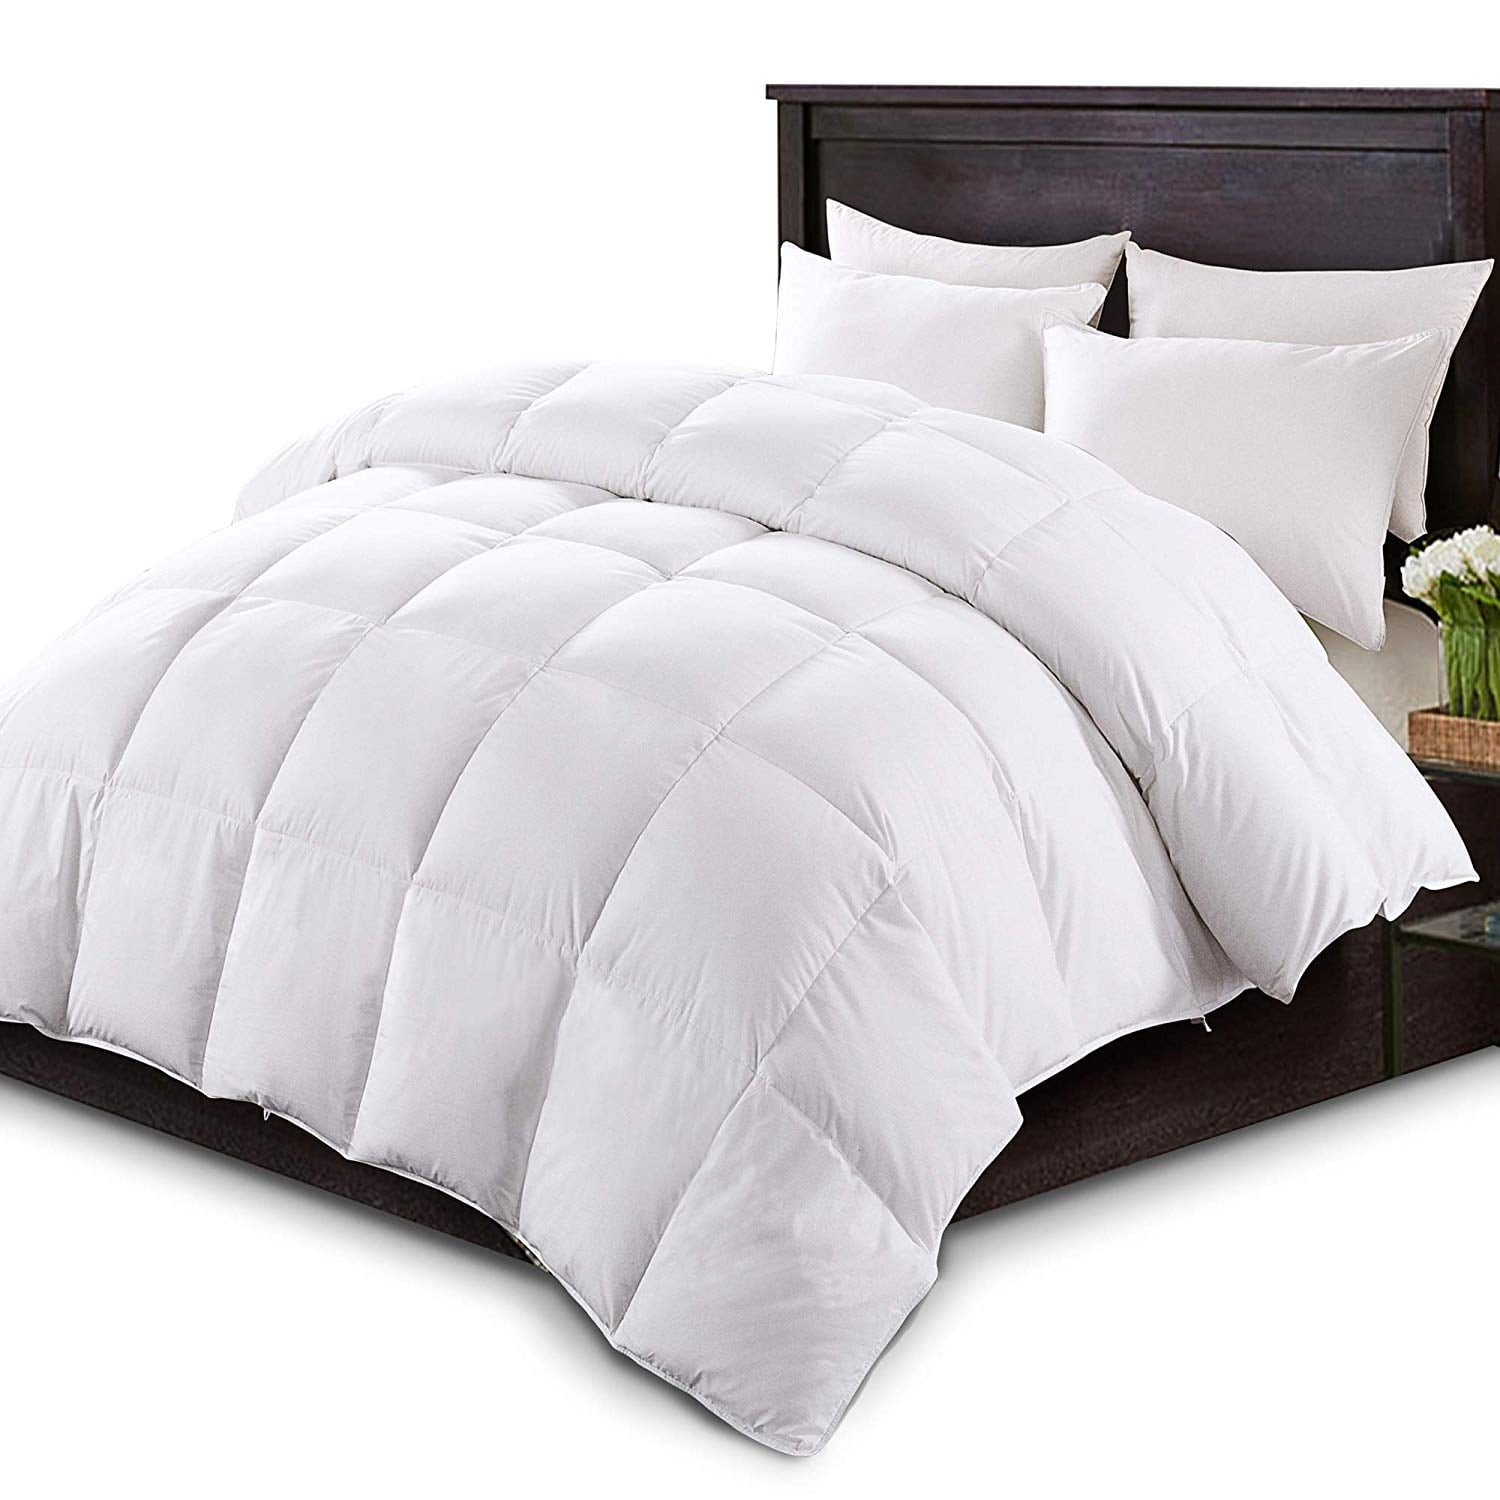 Poly Cotton Shell Down Proof Year Round White Down Comforter King Size KASENTEX Luxurious White Down Comforter Duvet Insert